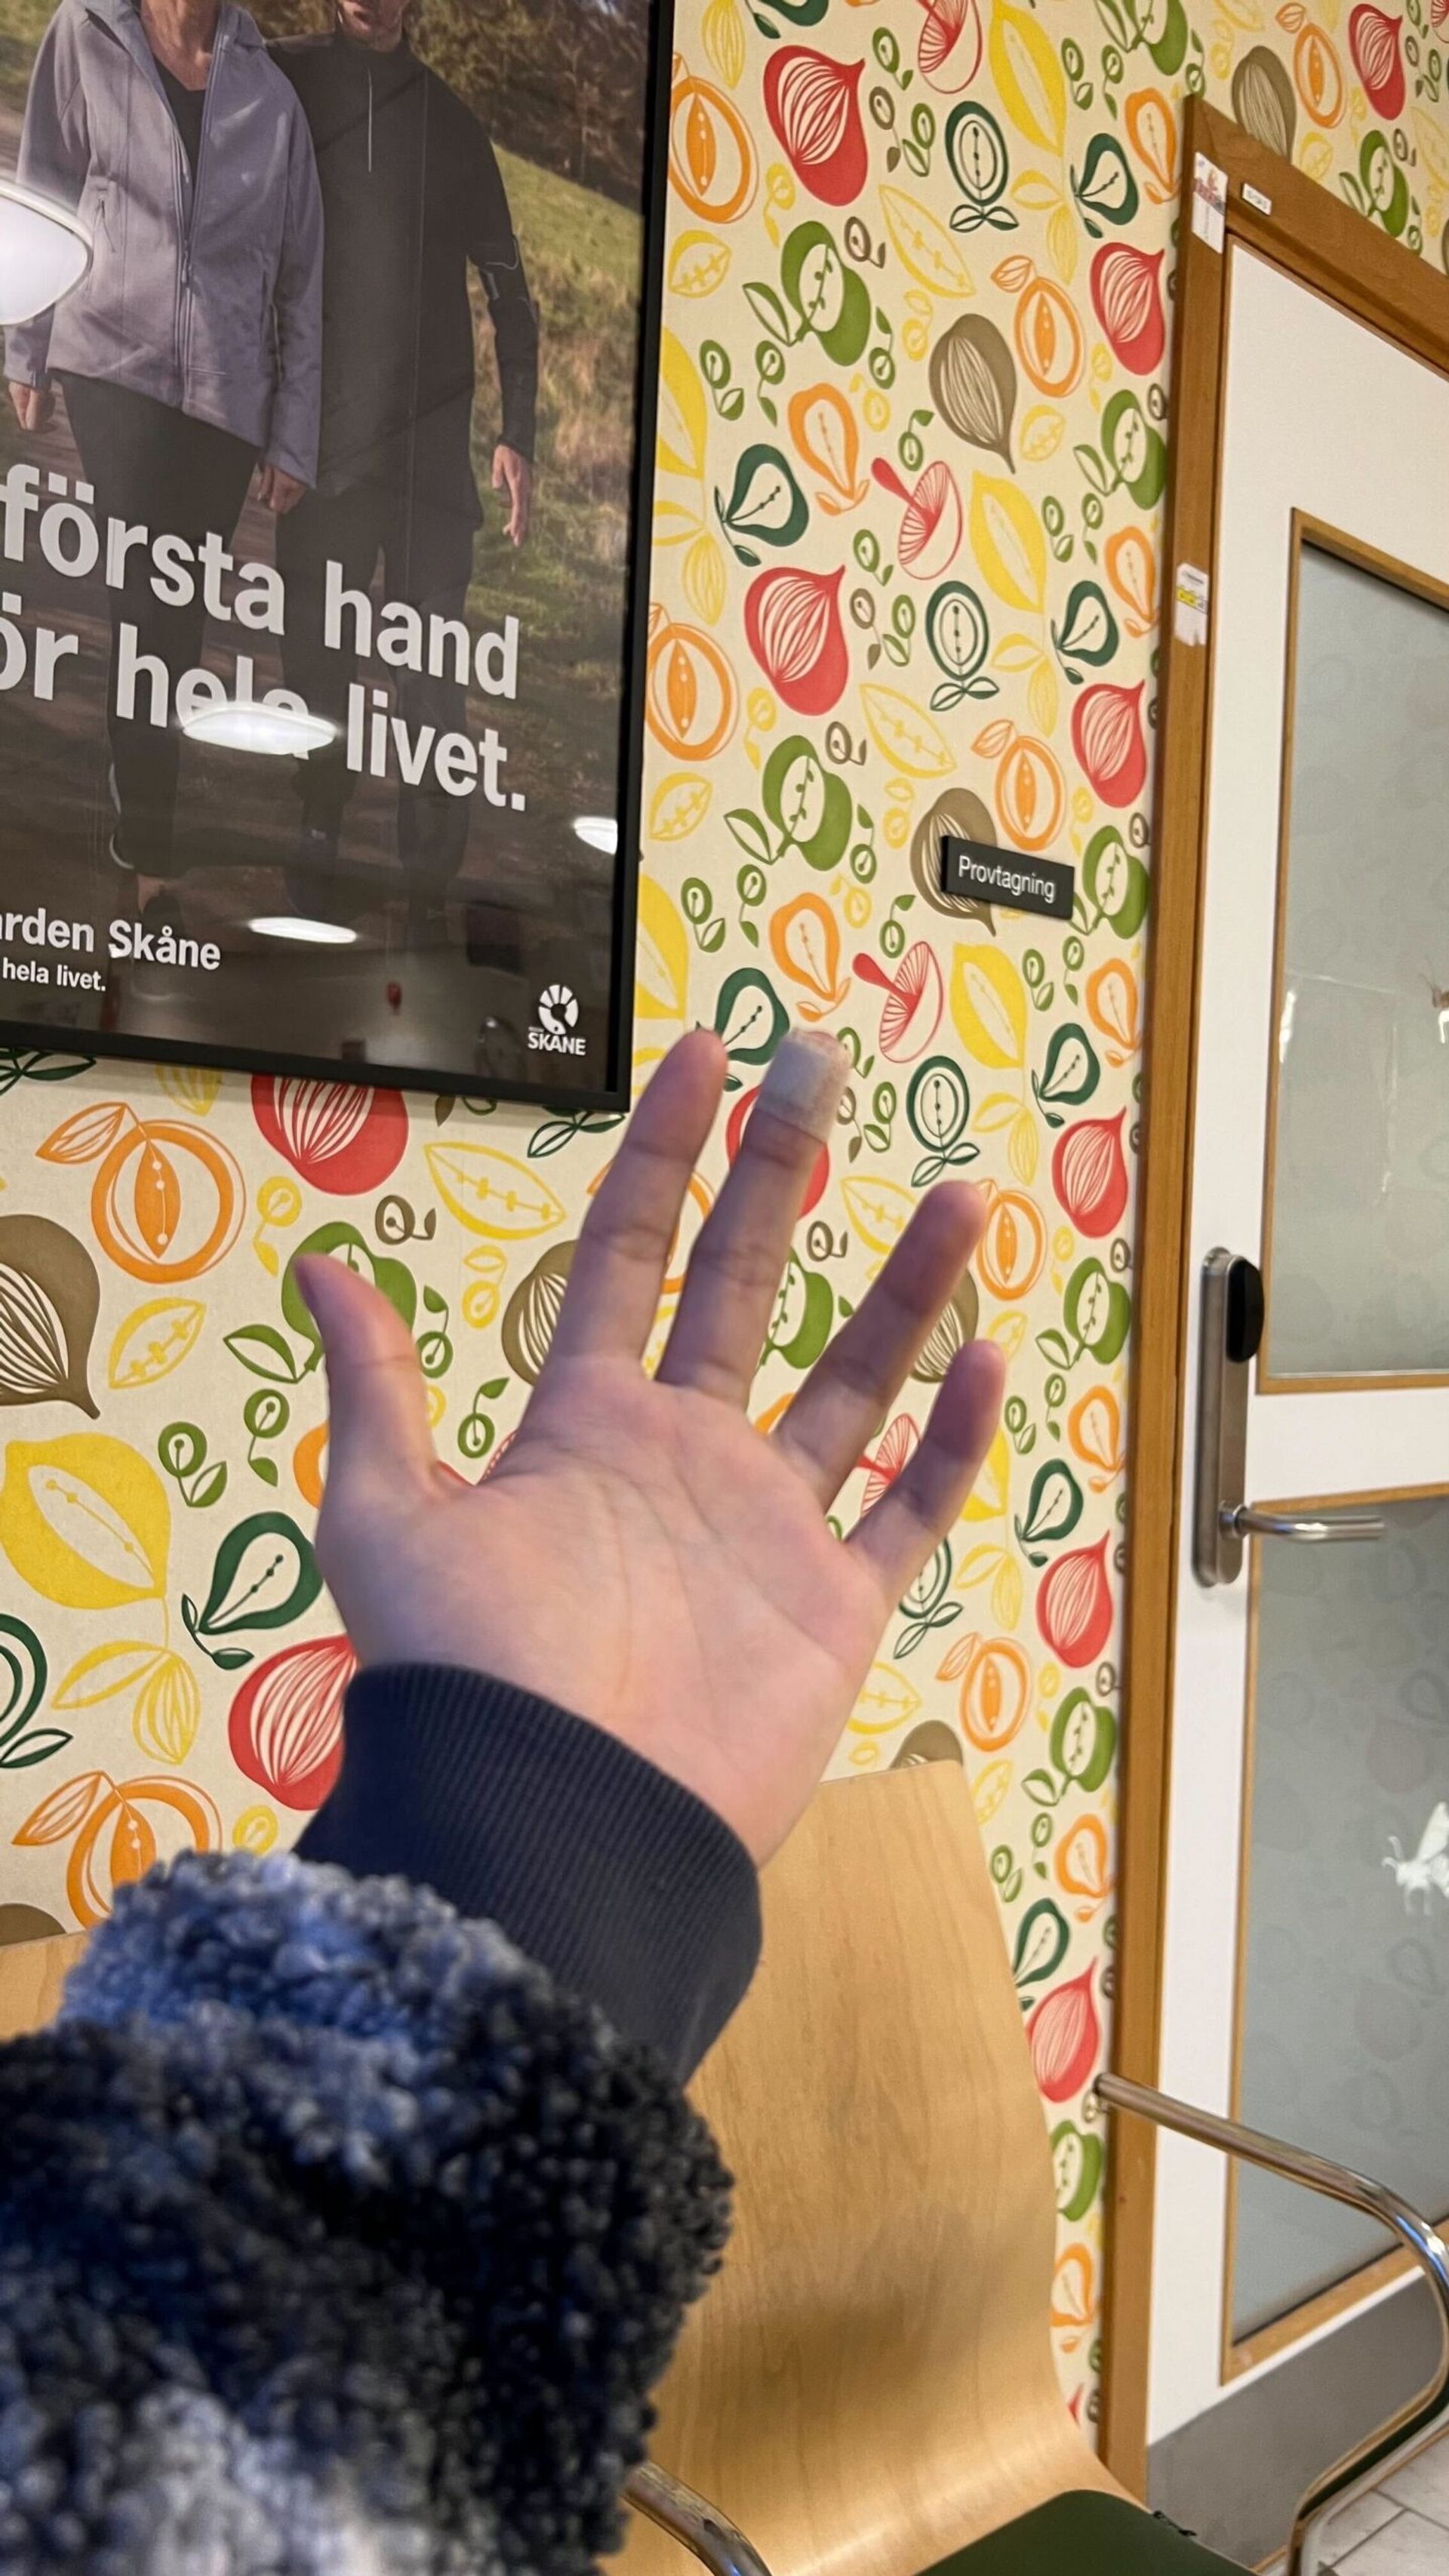 A hand in the doctor's waiting room.